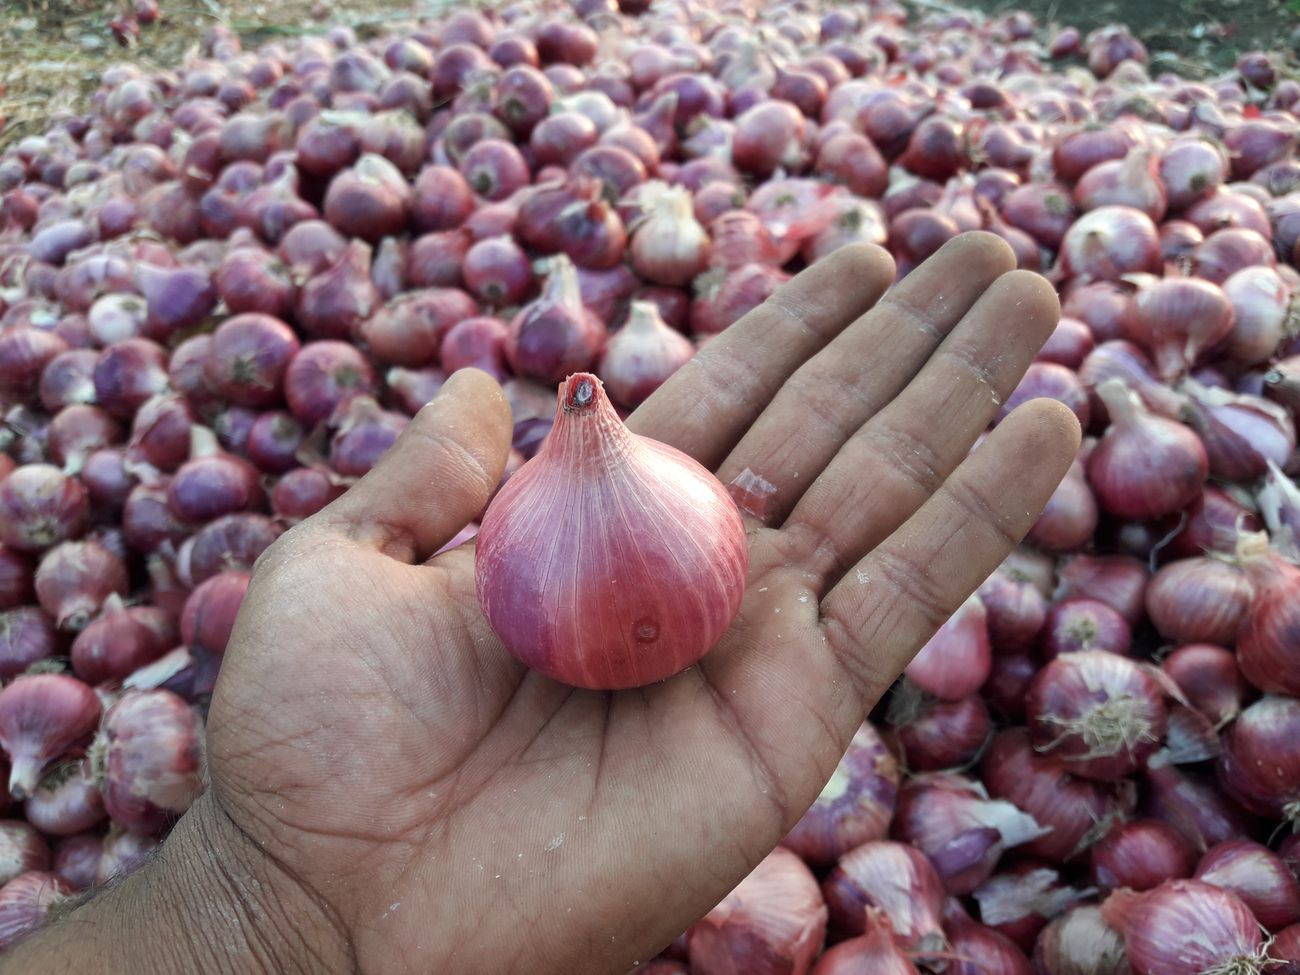 A farmer proudly shows off his harvest of red onions